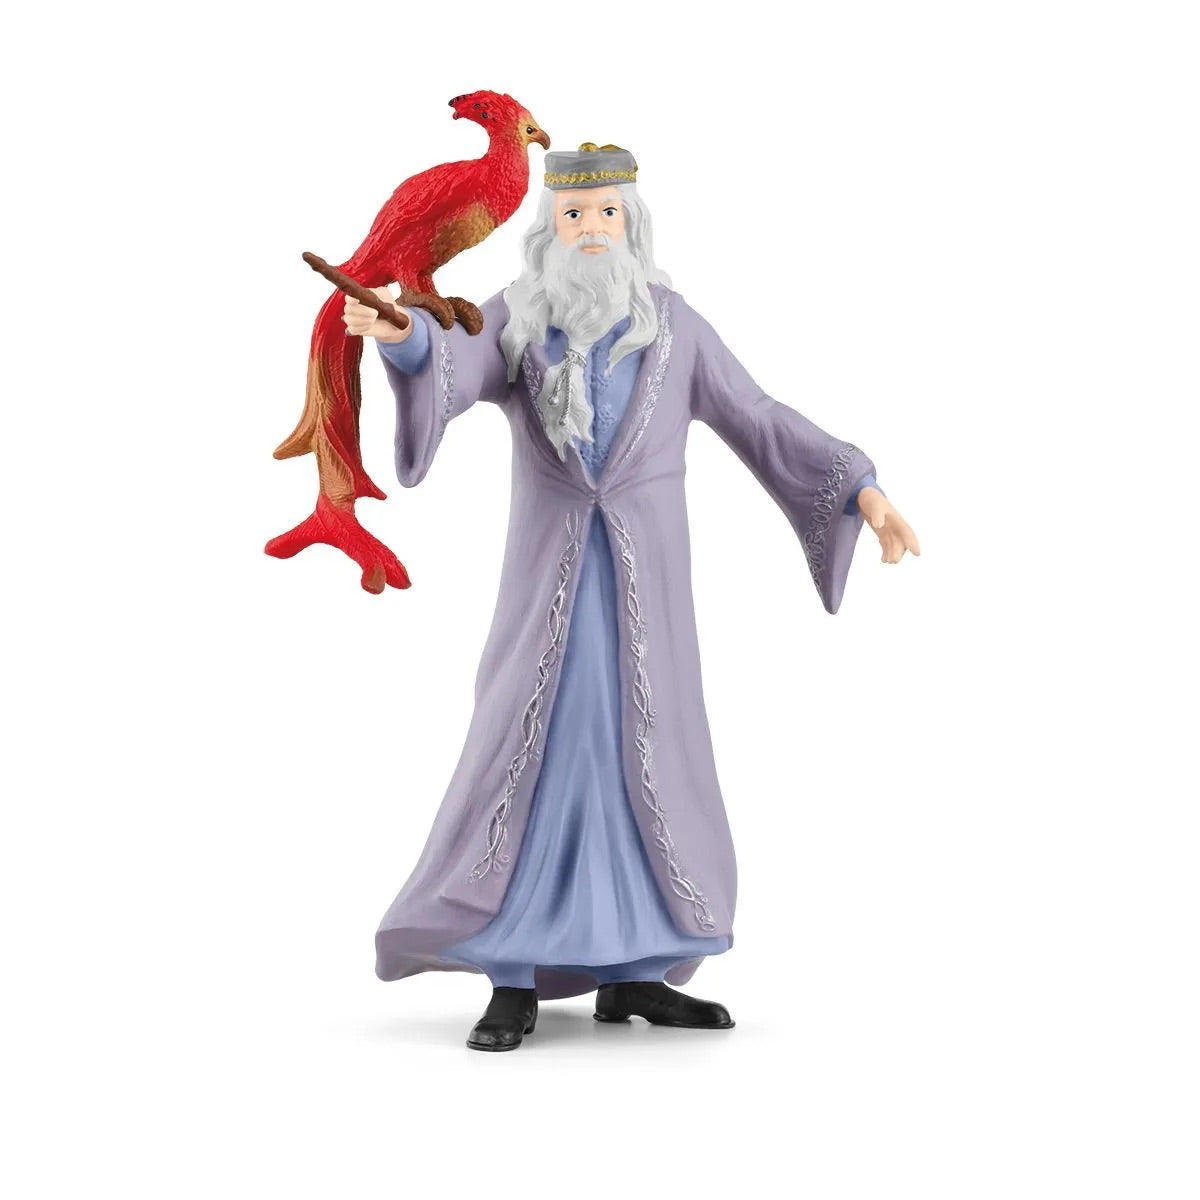 Harry Potter Dumbledore & Fawkes Figurine by Schleich #42637